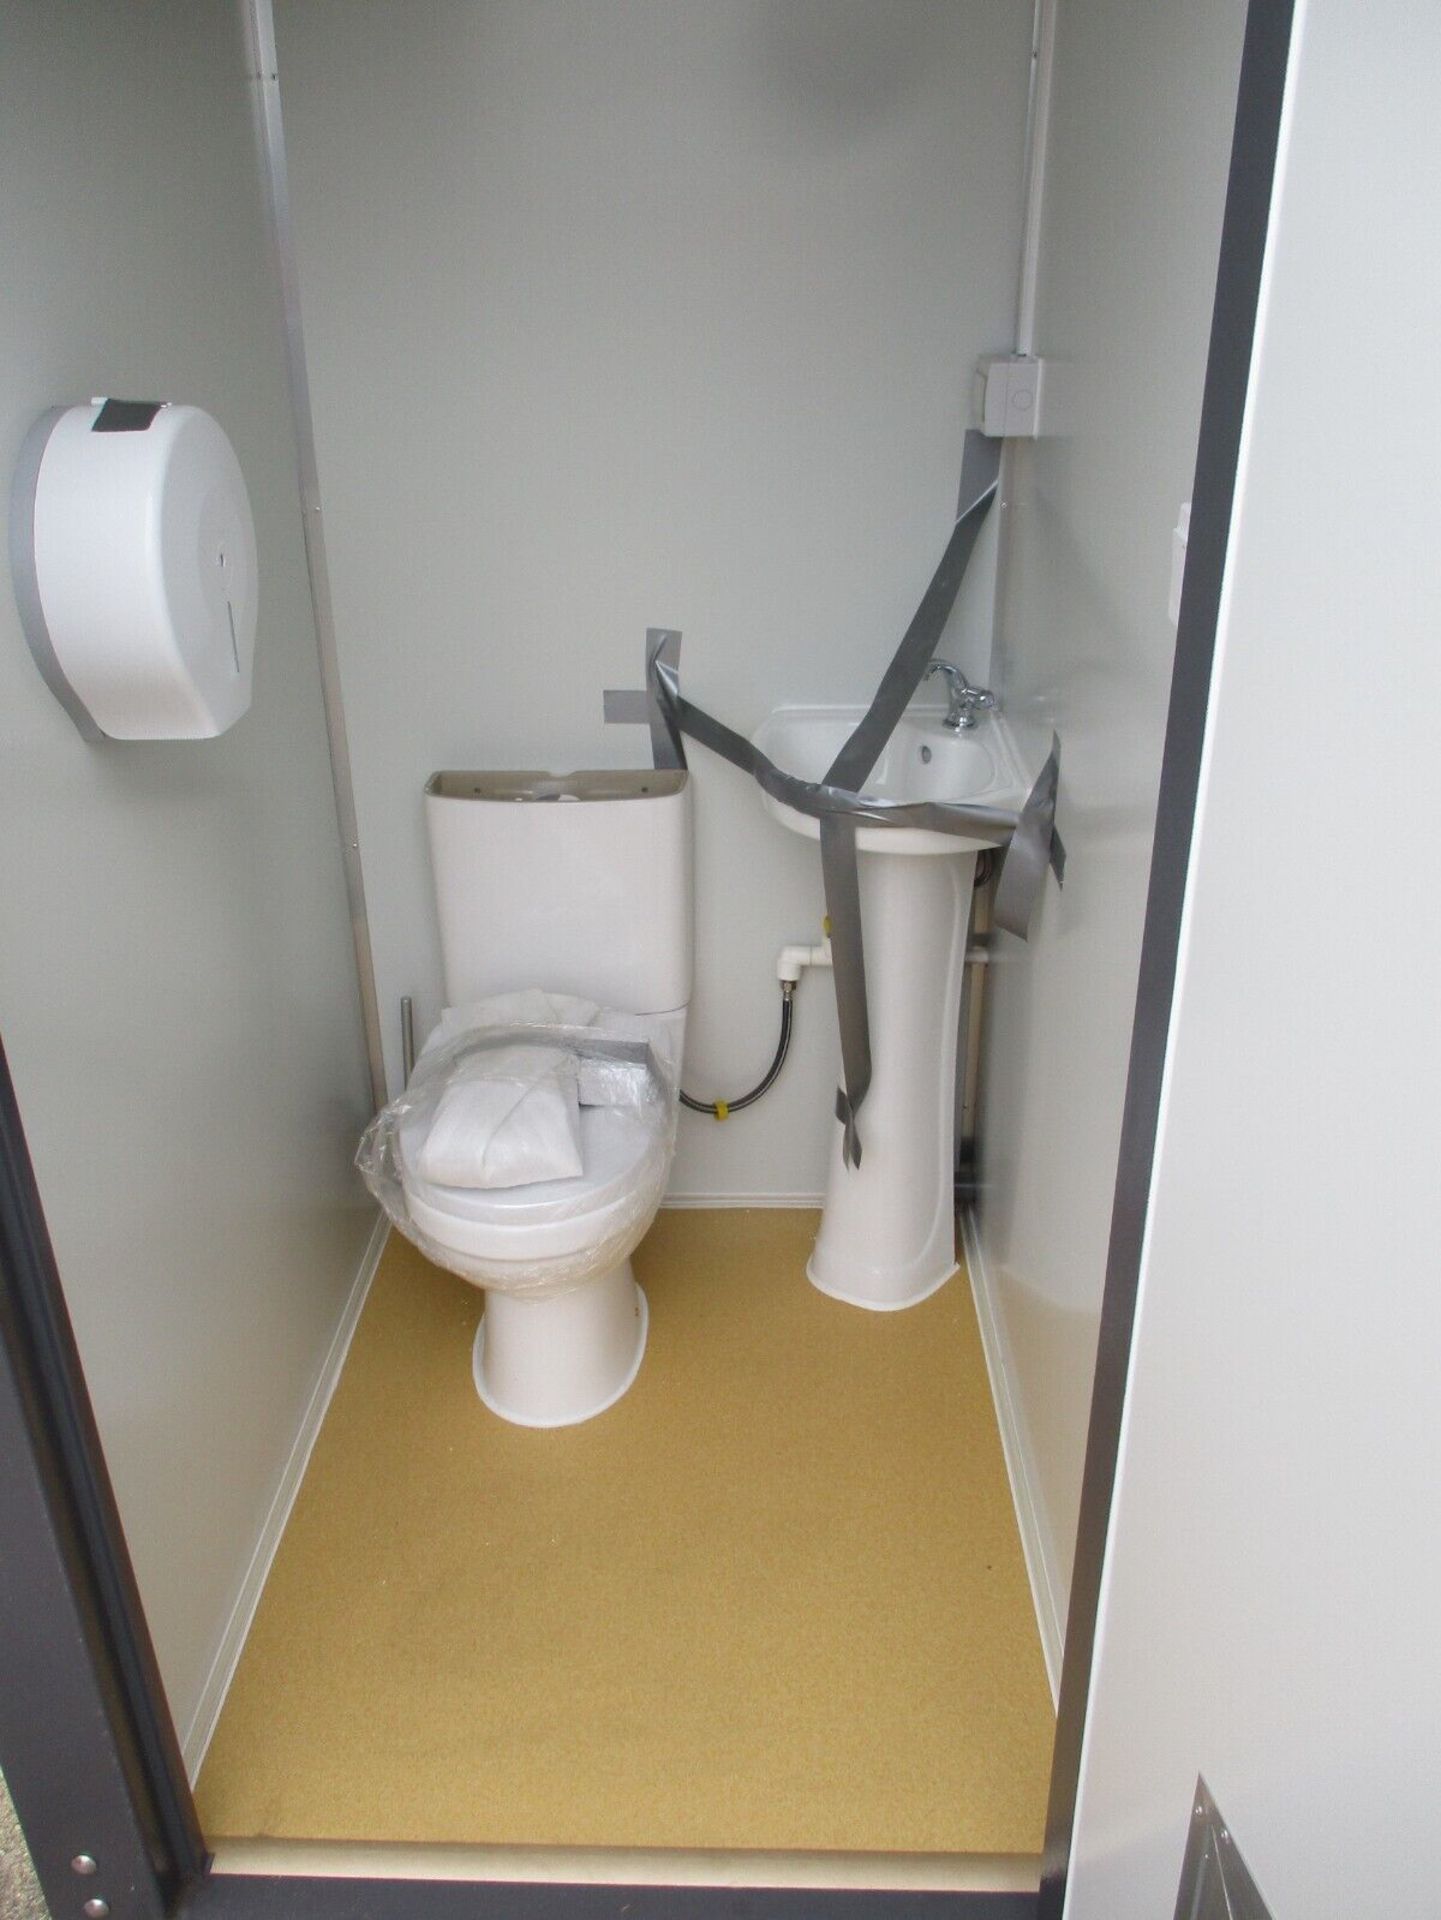 COMPACT COMFORT: 2.15M X 1.3M SHIPPING CONTAINER TOILET OASIS - Image 2 of 9